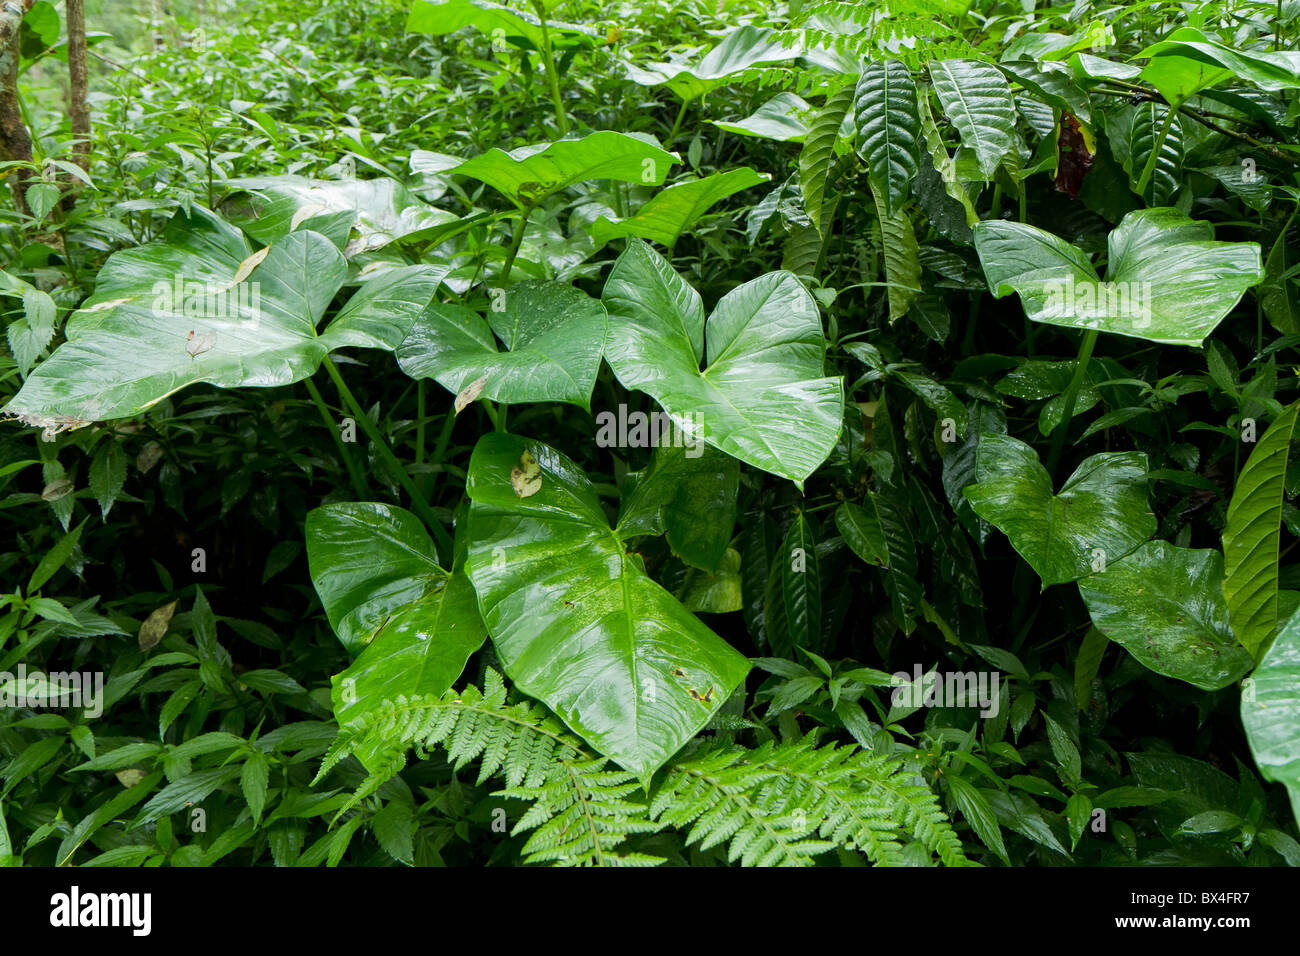 yam plant in tropical rain forest Stock Photo